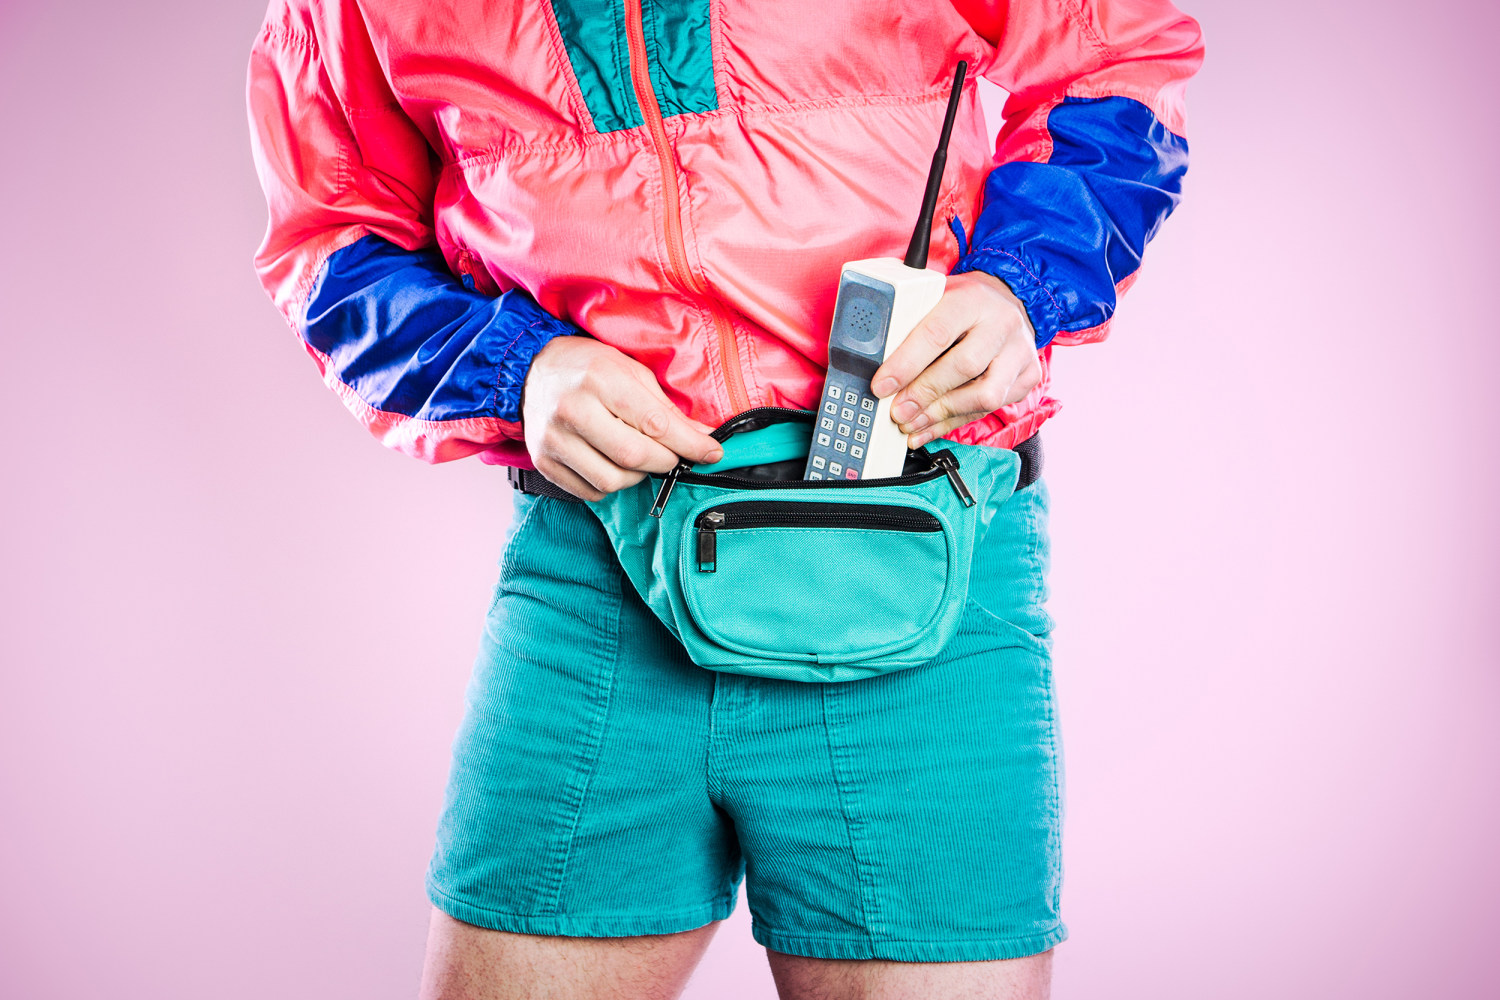 Fanny packs are so popular, they make up 25 percent of accessory sales  growth